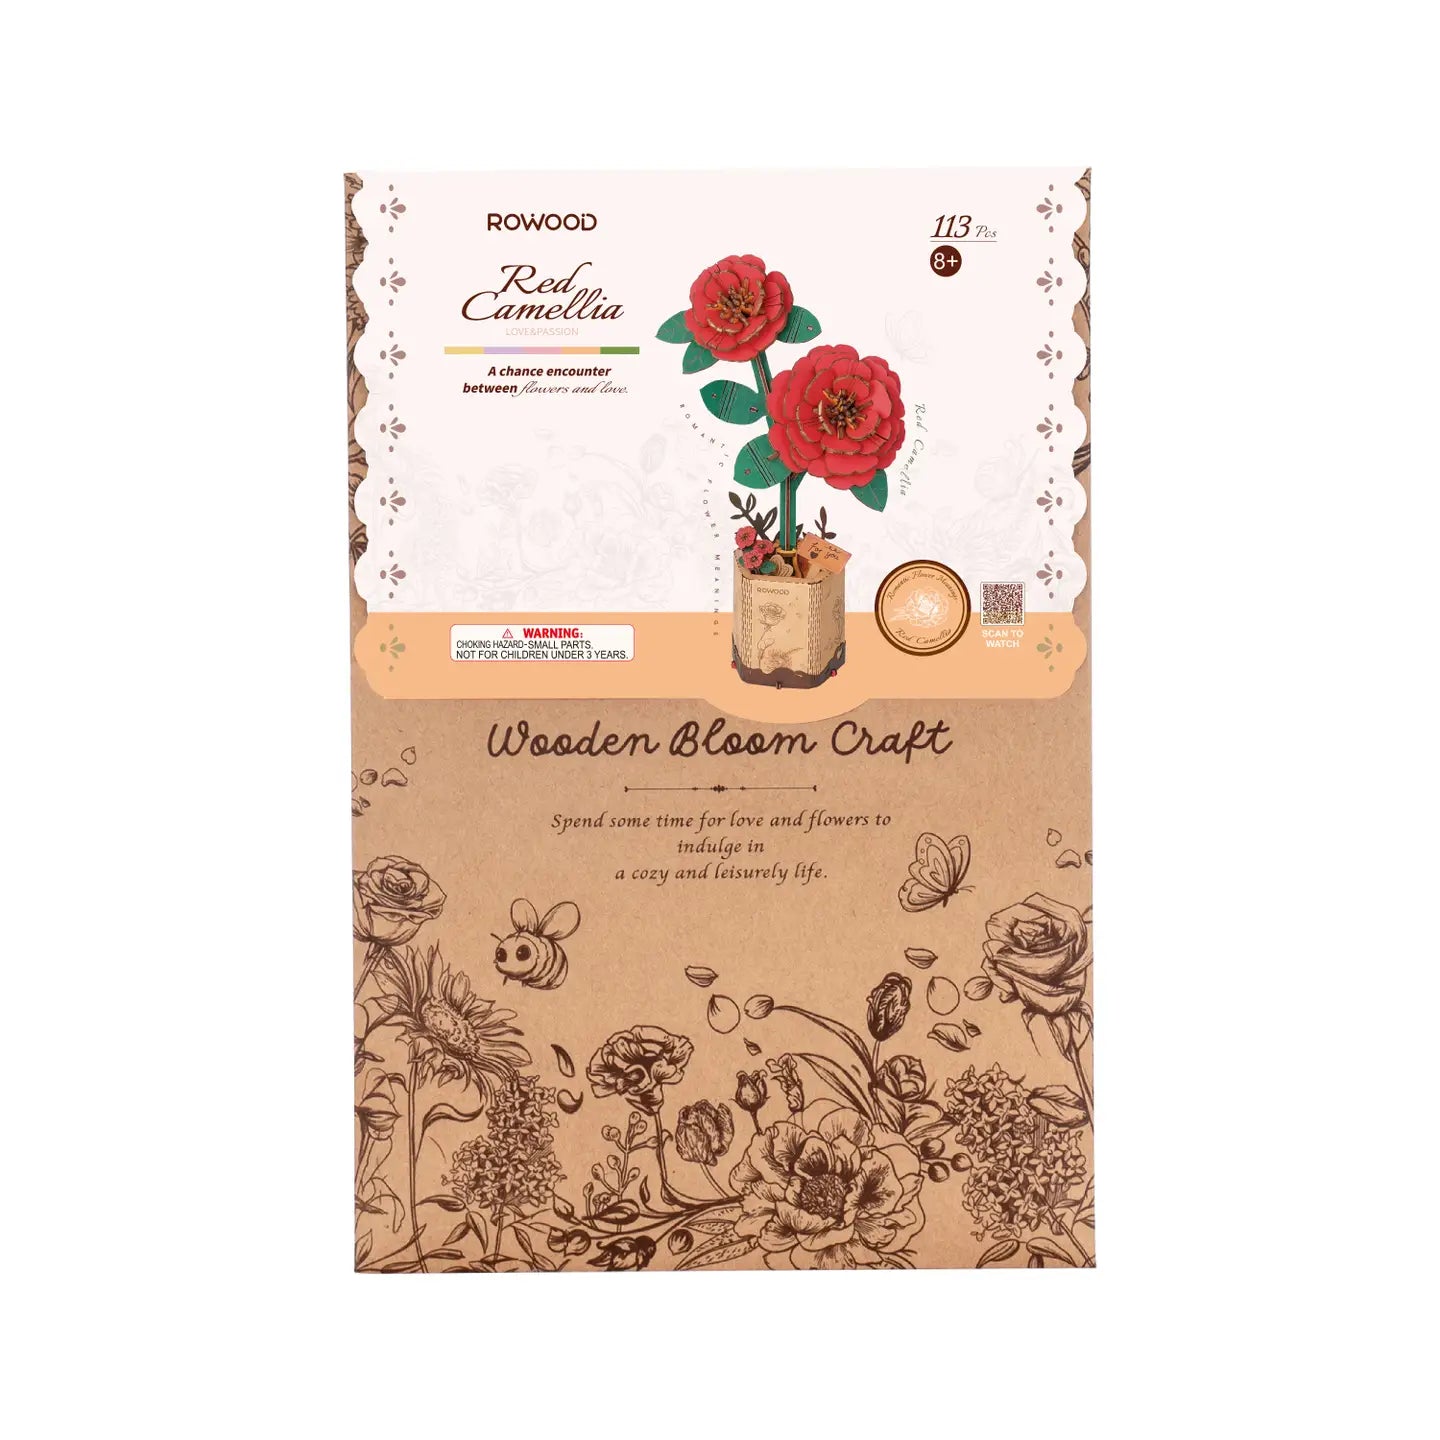 Wooden 3D puzzle of a red camellia flower by Rowood. Craft paper box with floral design. Inspire creativity with 96 wooden pieces. Perfect for decor or gifting. Dimensions: 9.6 x 6.5 x 0.3 in.